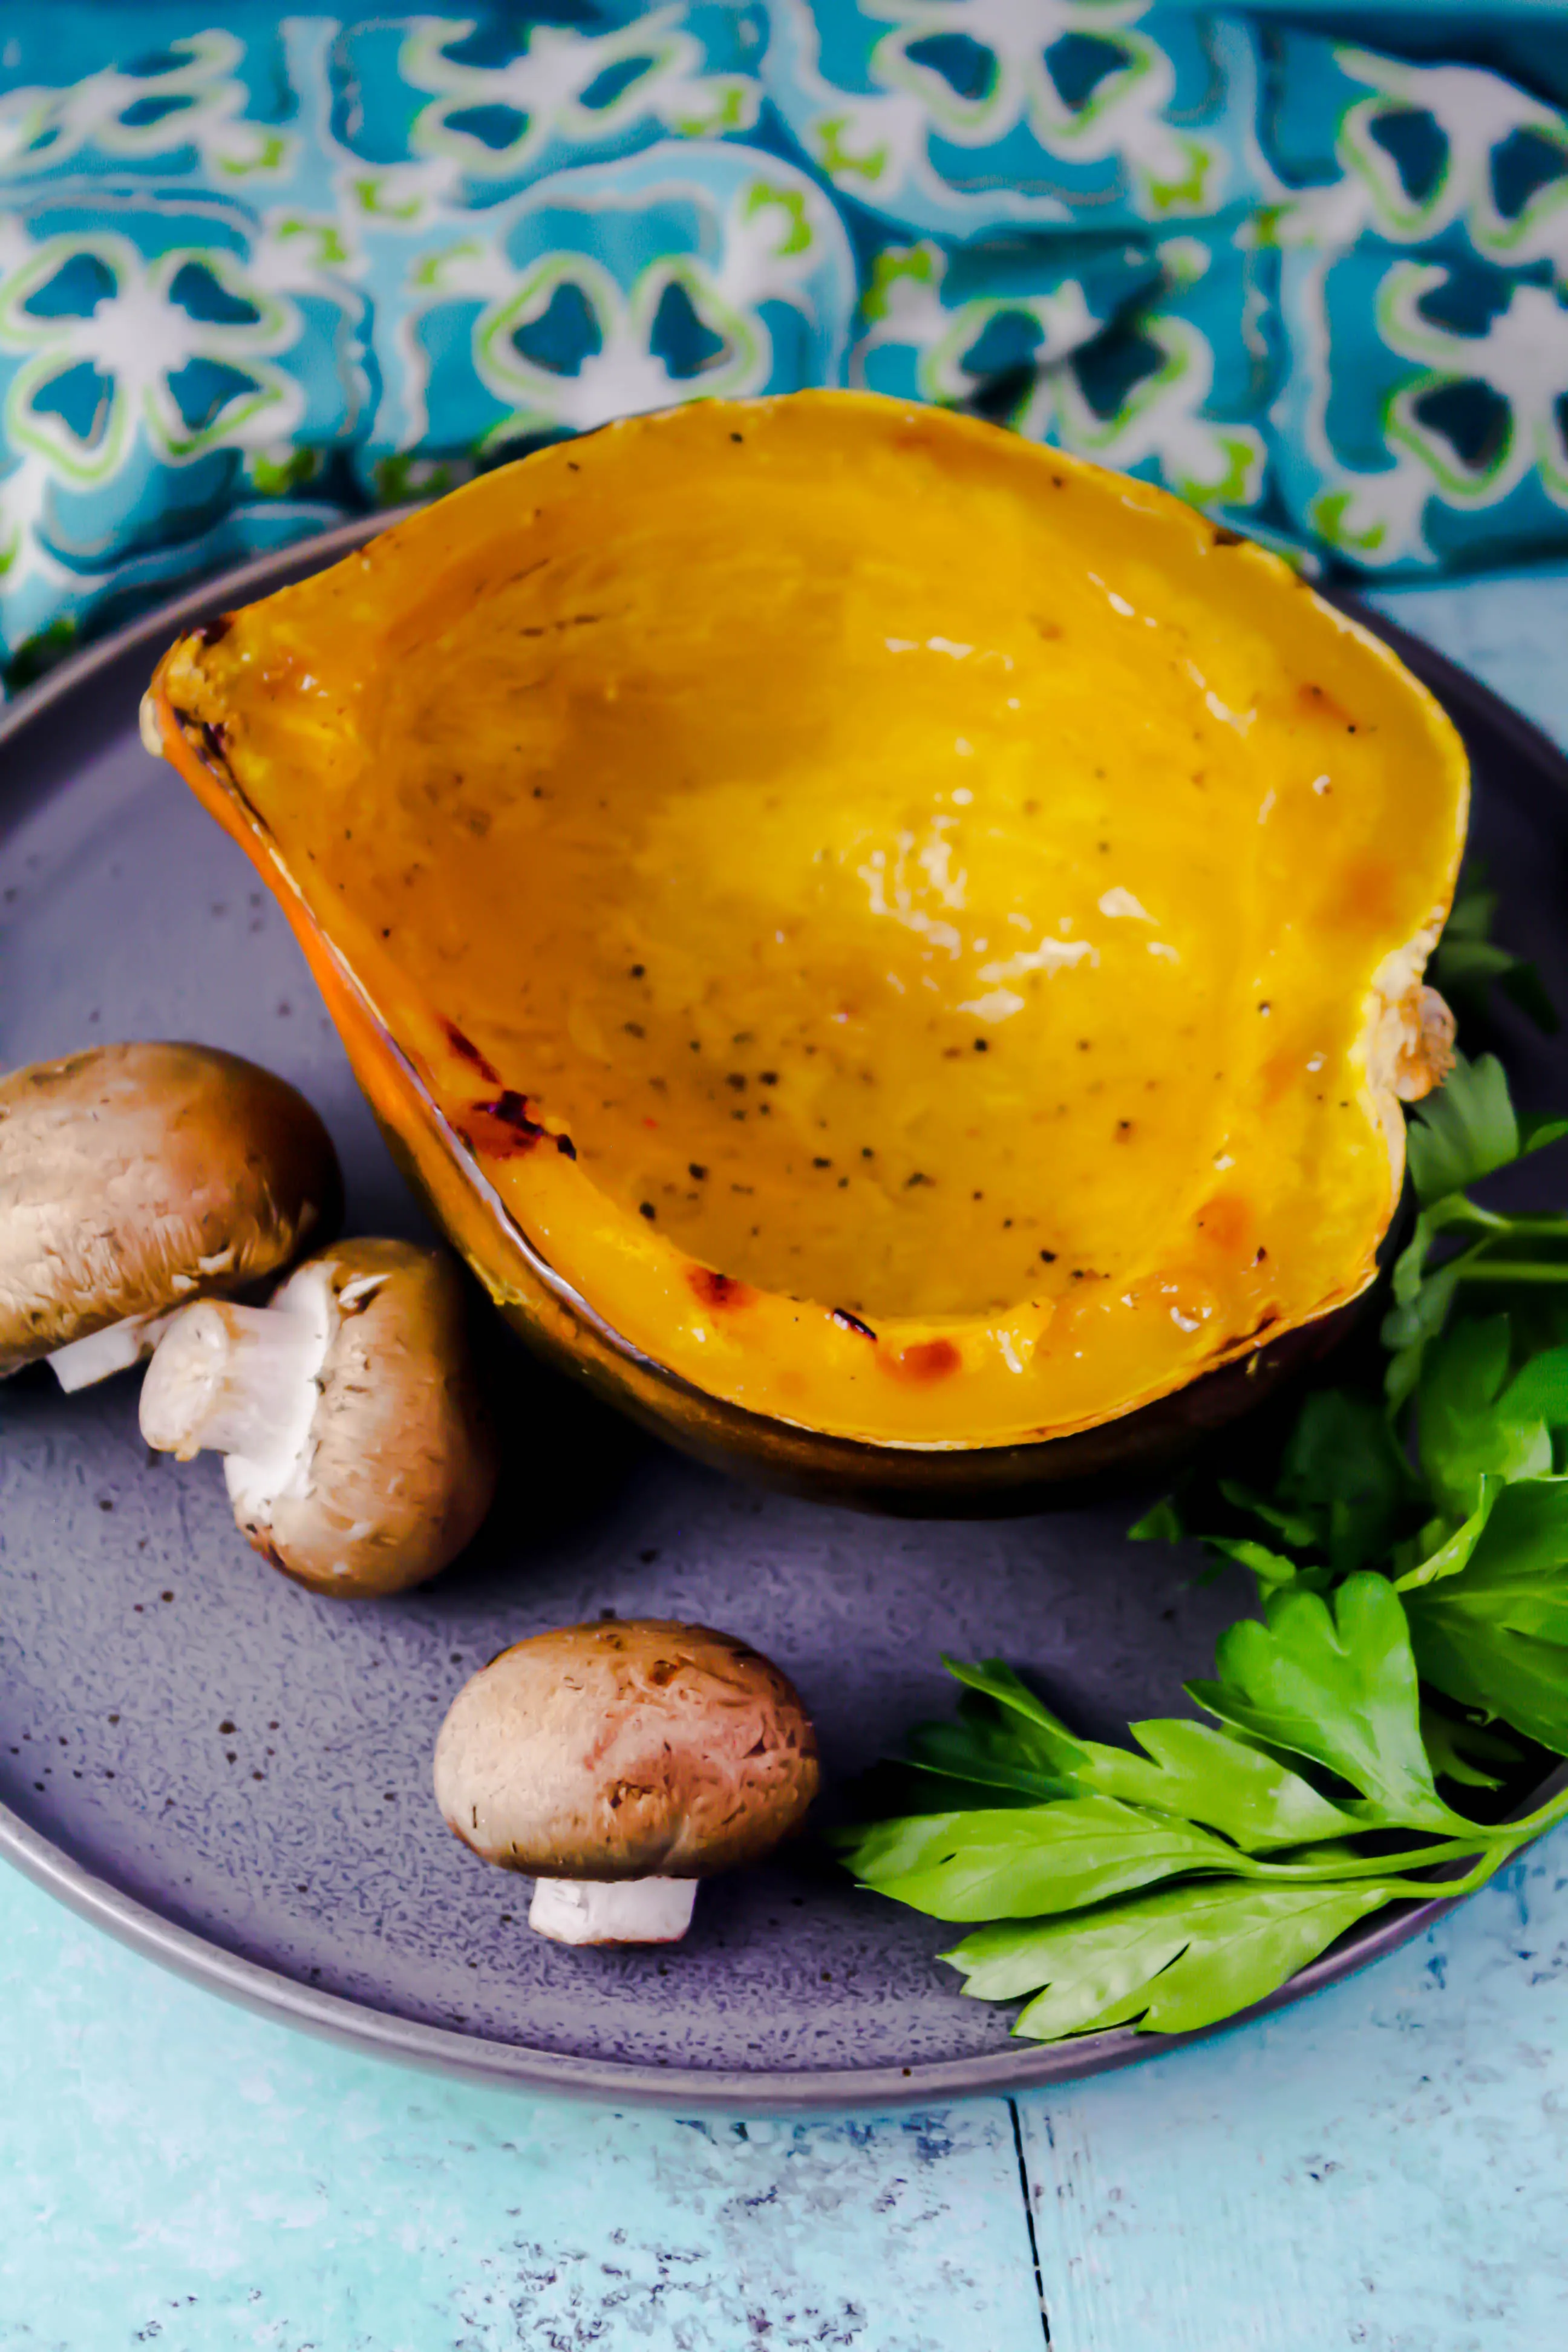 Acorn Squash Stuffed with Brown Rice, Mushrooms, and Cranberries makes a tasty dish for any winter meal. Acorn Squash Stuffed with Brown Rice, Mushrooms, and Cranberries is a delightful dish everyone will love.